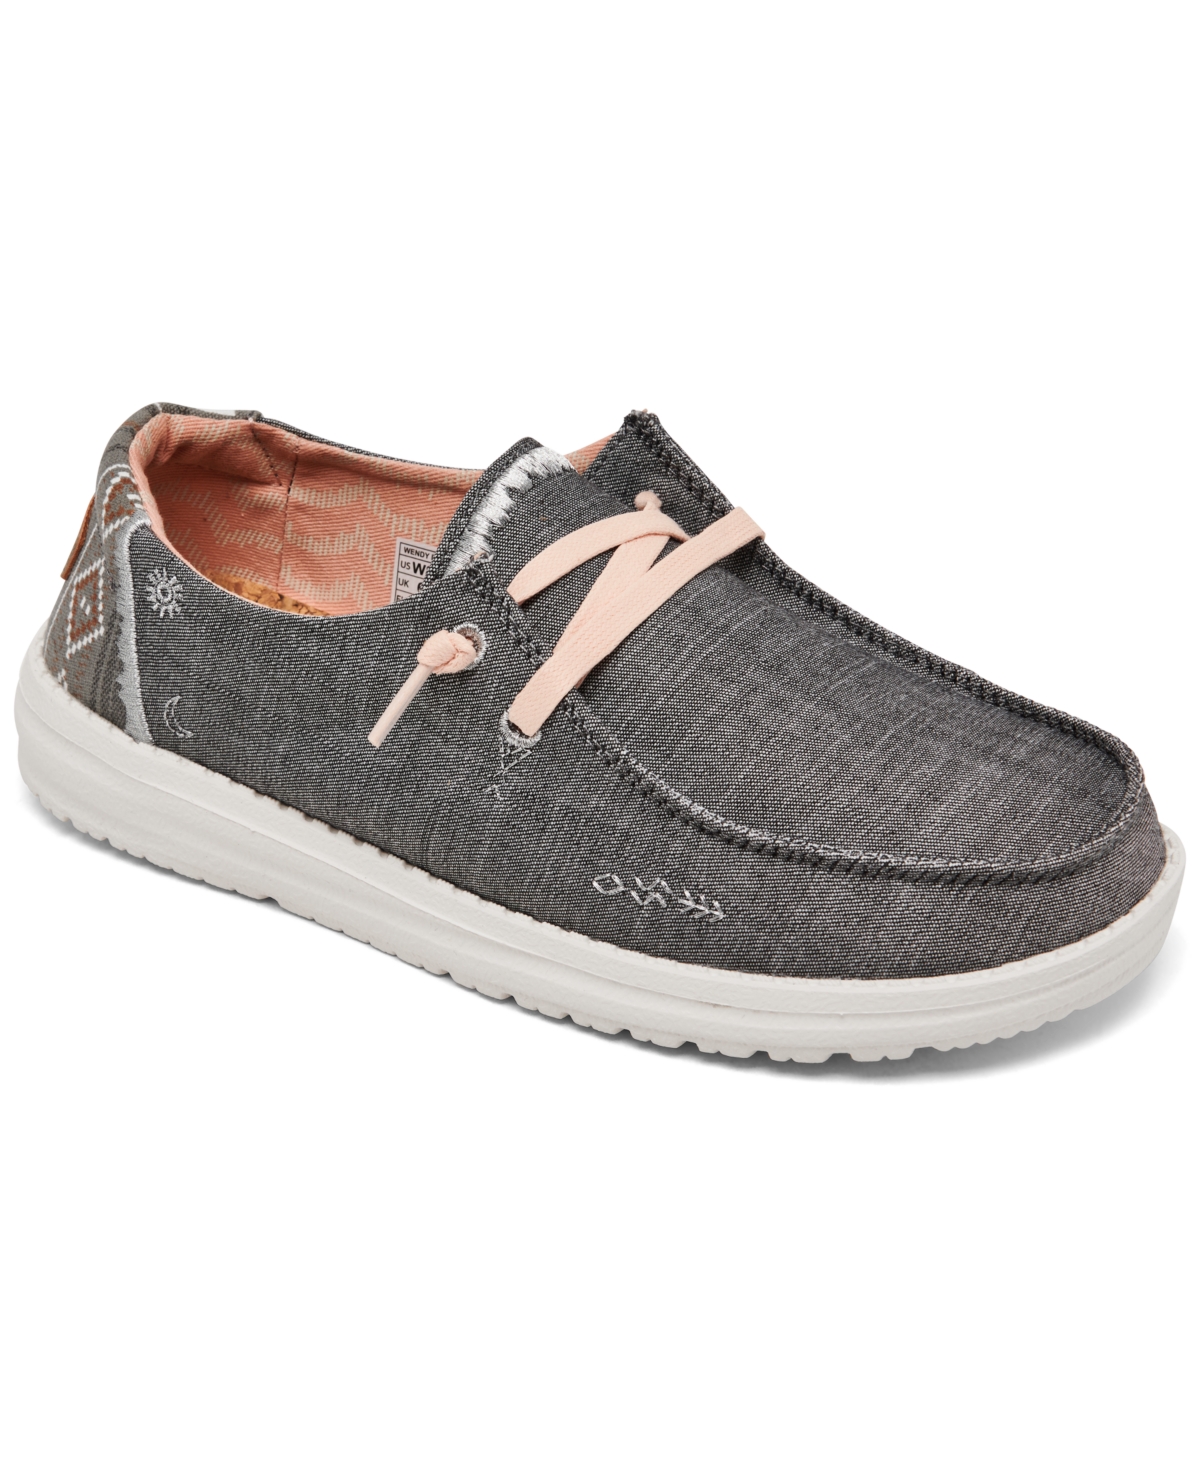 Women's Wendy Boho Embroidered Casual Sneakers from Finish Line - Gray